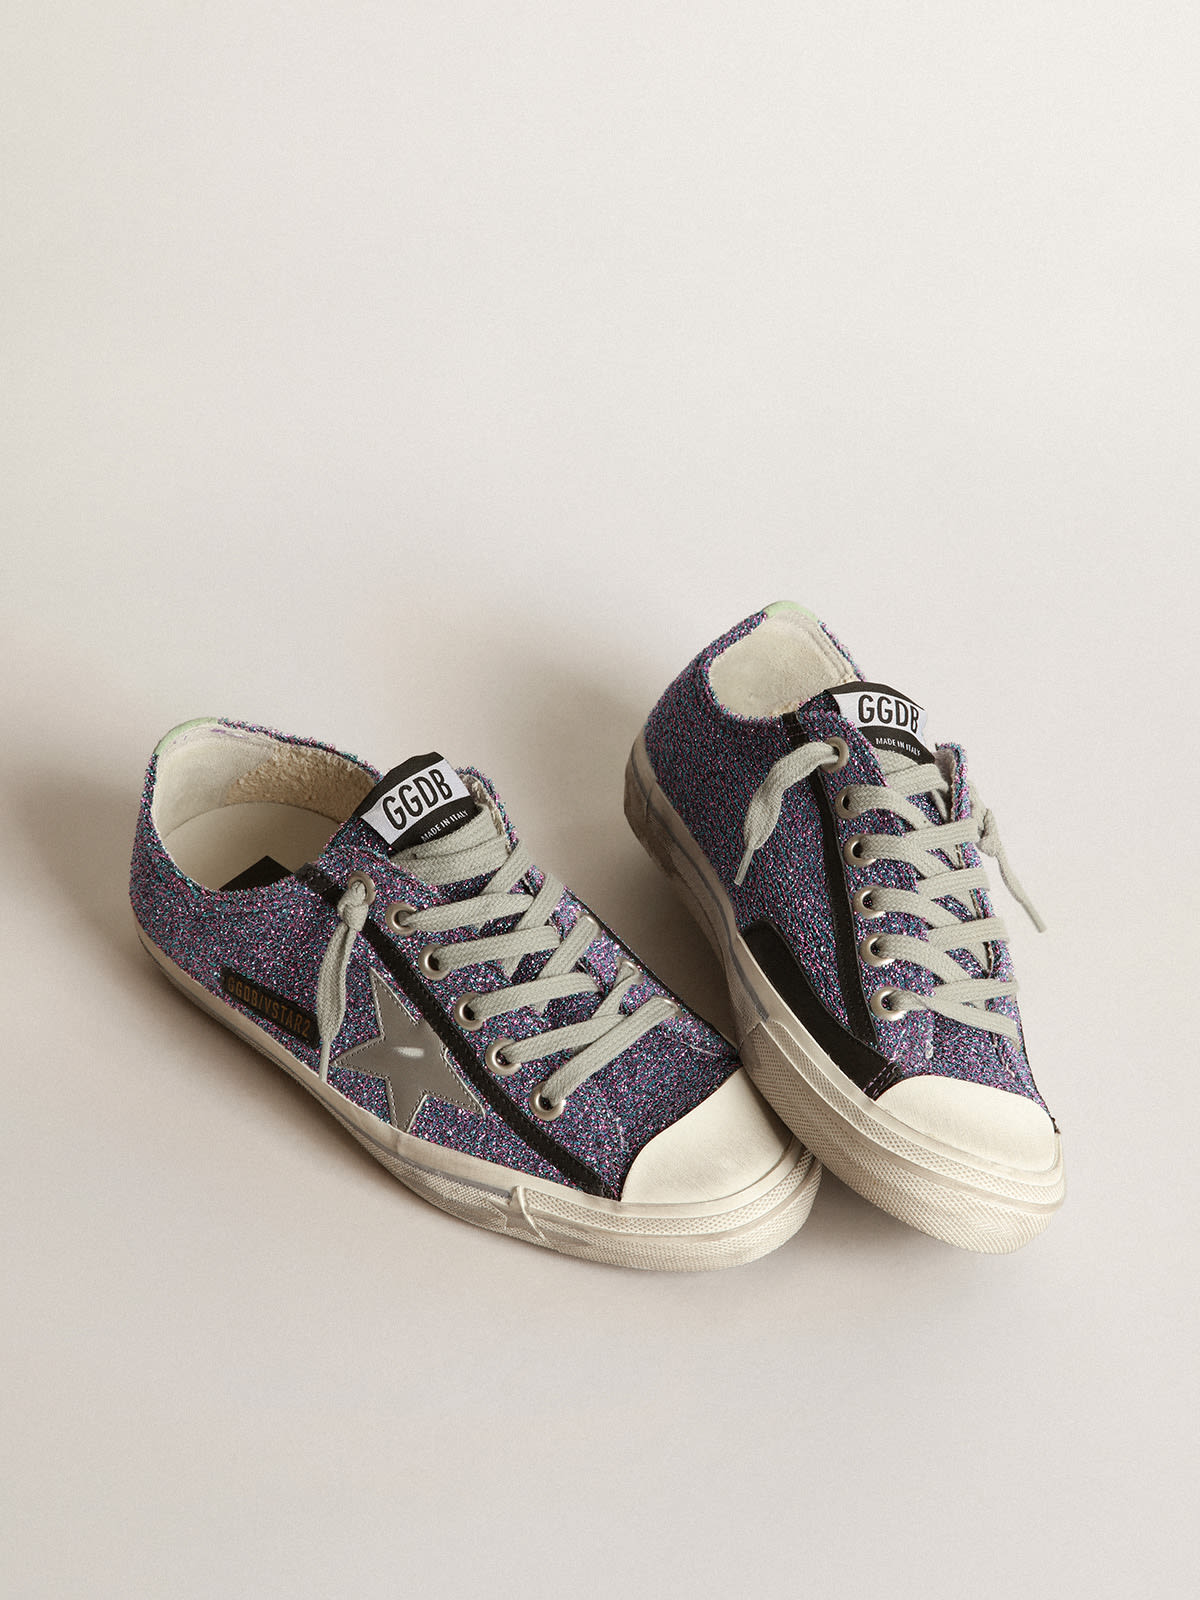 Golden Goose - V-Star sneakers with metallic yarn finishing in 